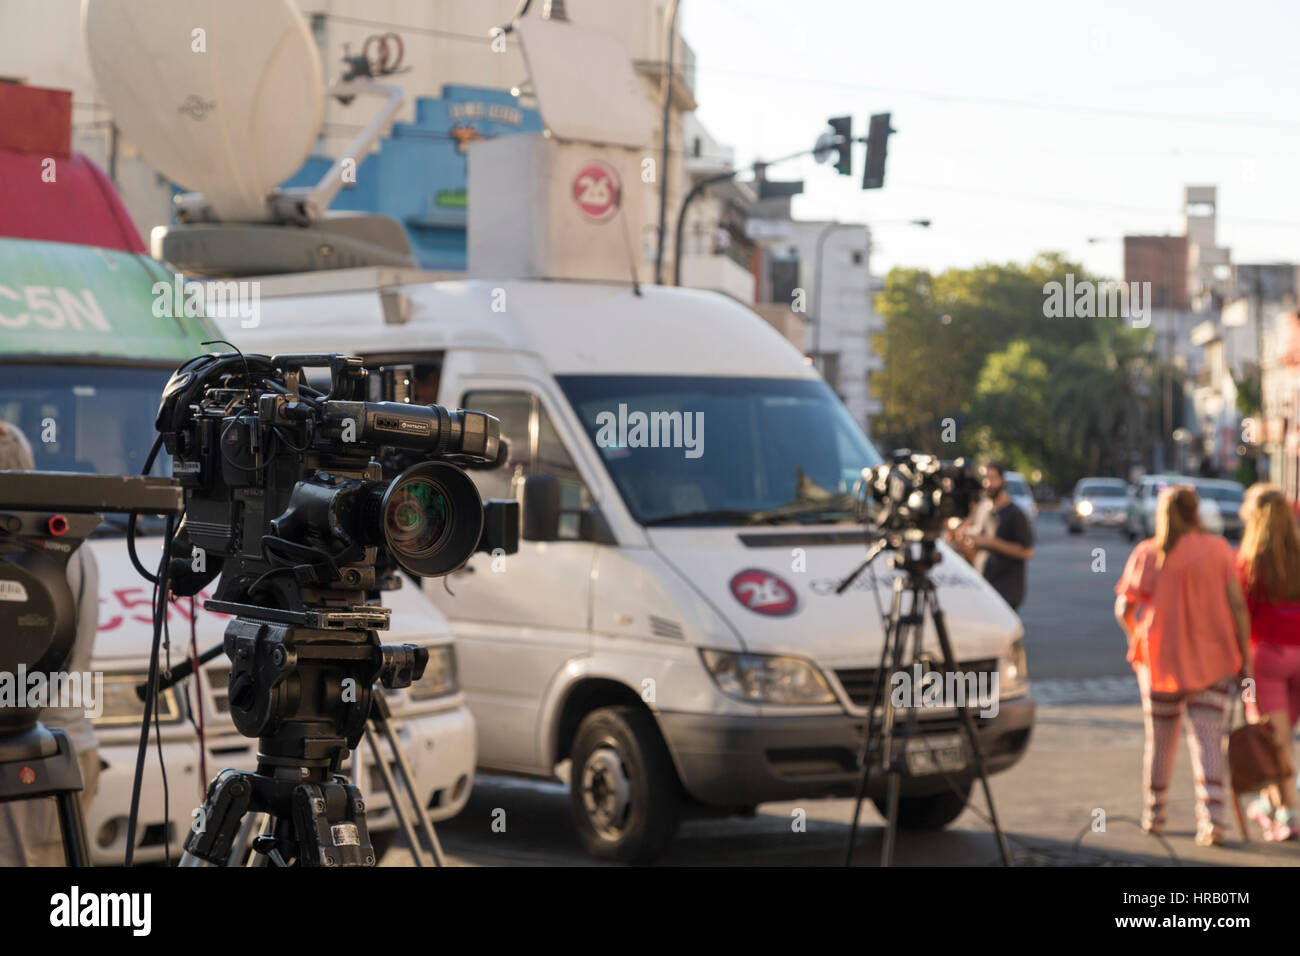 La Plata, Argentina. 28th Feb, 2017. Mass media trucks and cameras waiting for the press conference. Credit: Federico Julien/Alamy Live News Stock Photo